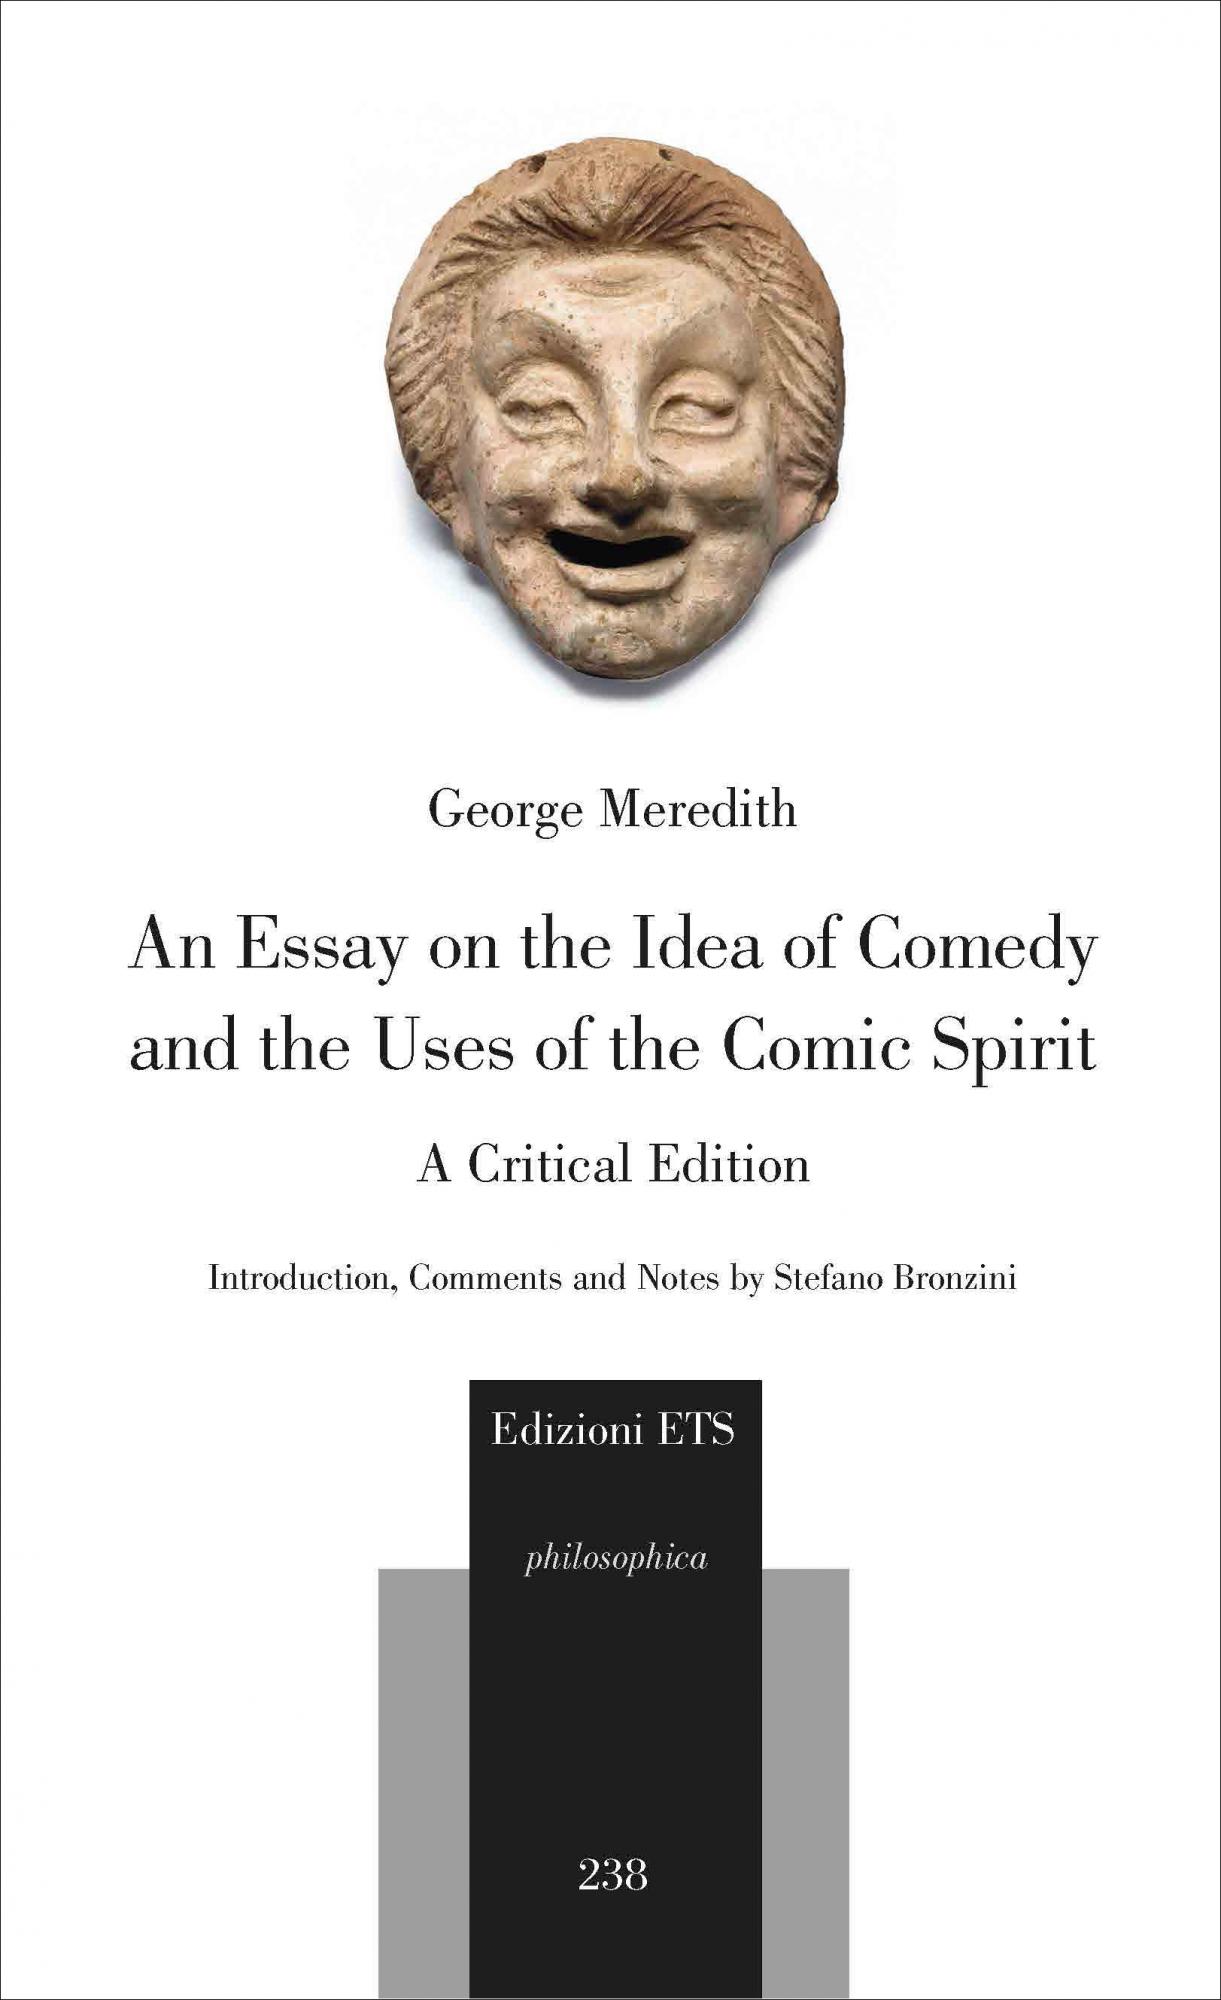 An Essay on the Idea of Comedy and the Uses of the Comic Spirit.A Critical Edition